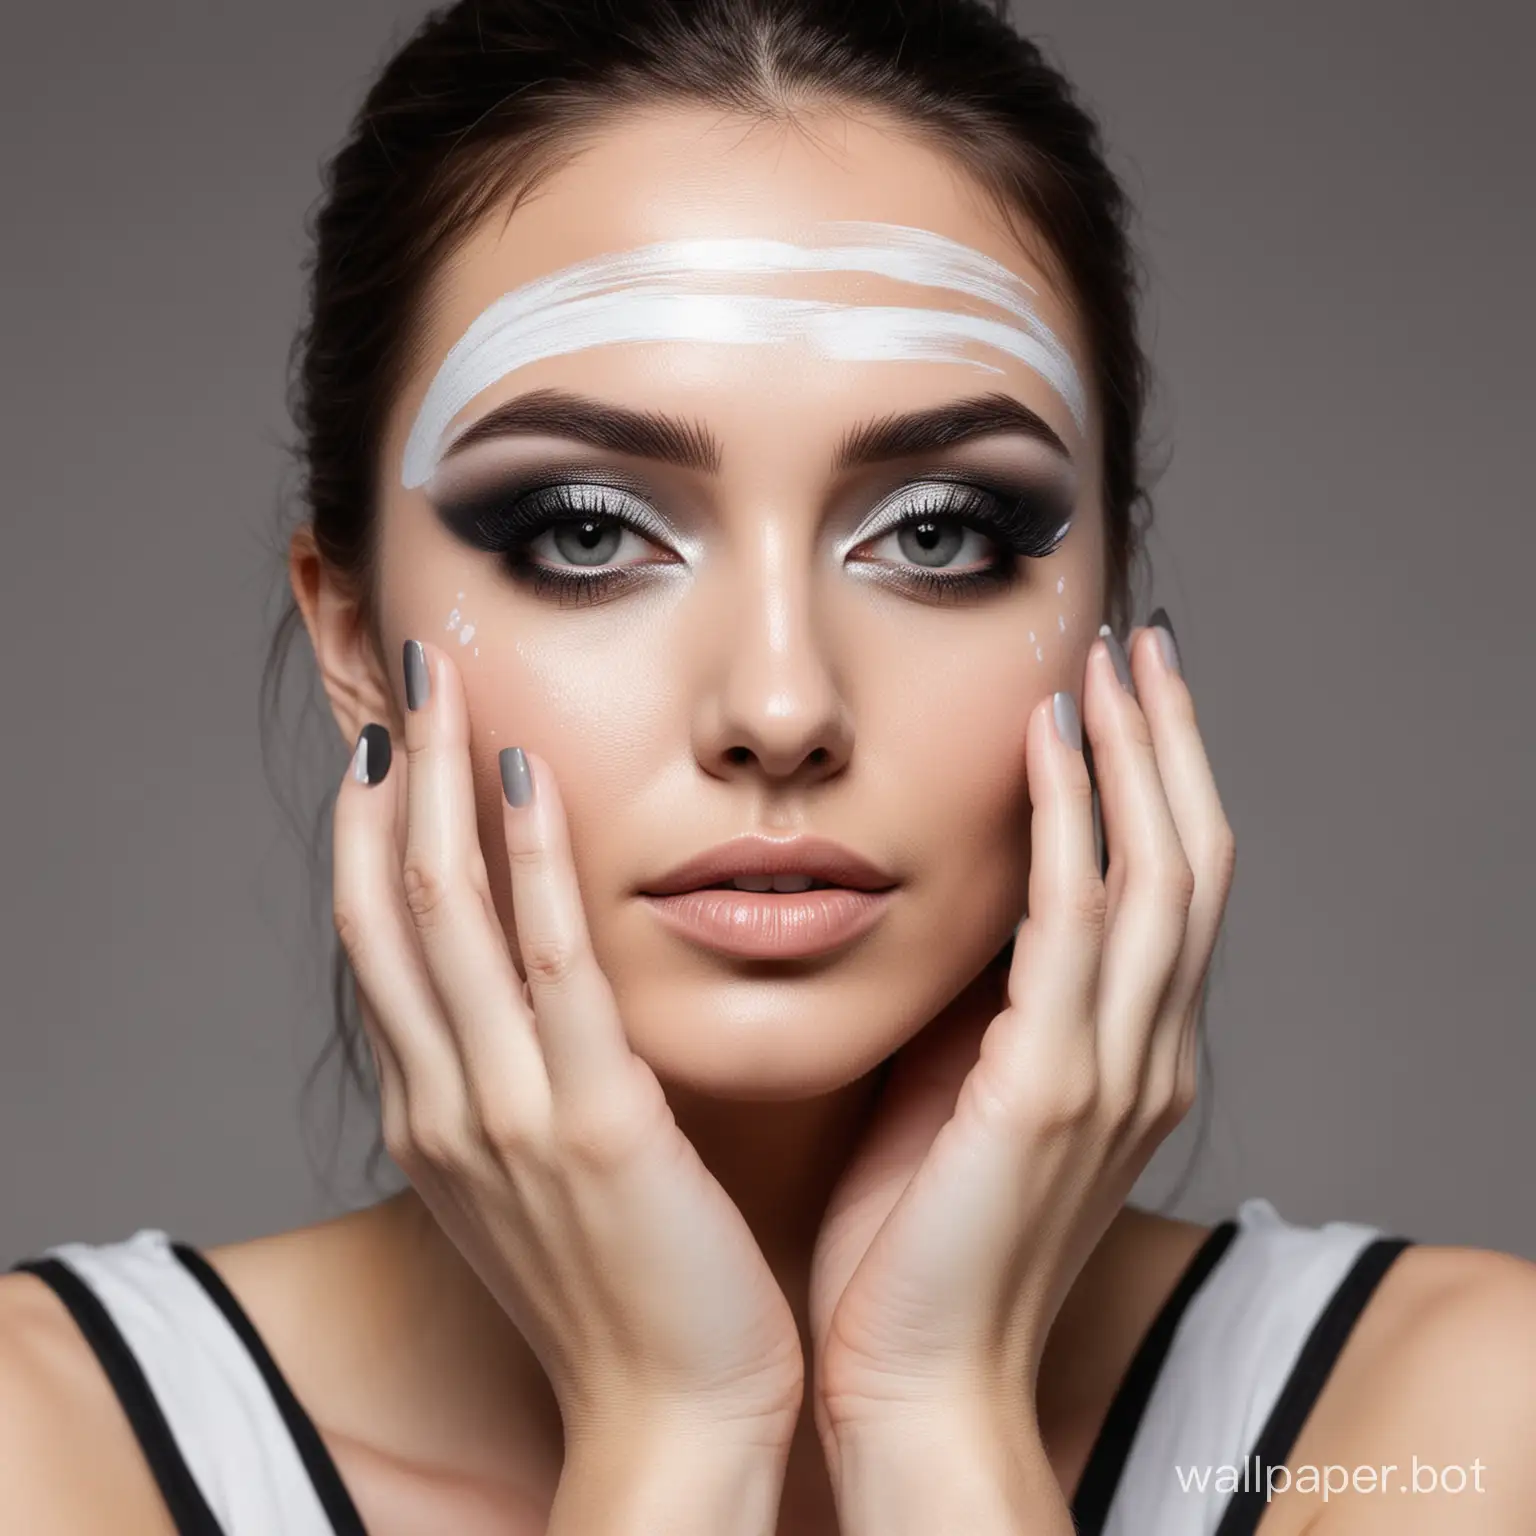 Woman-with-Monochromatic-Makeup-Touching-Her-Face